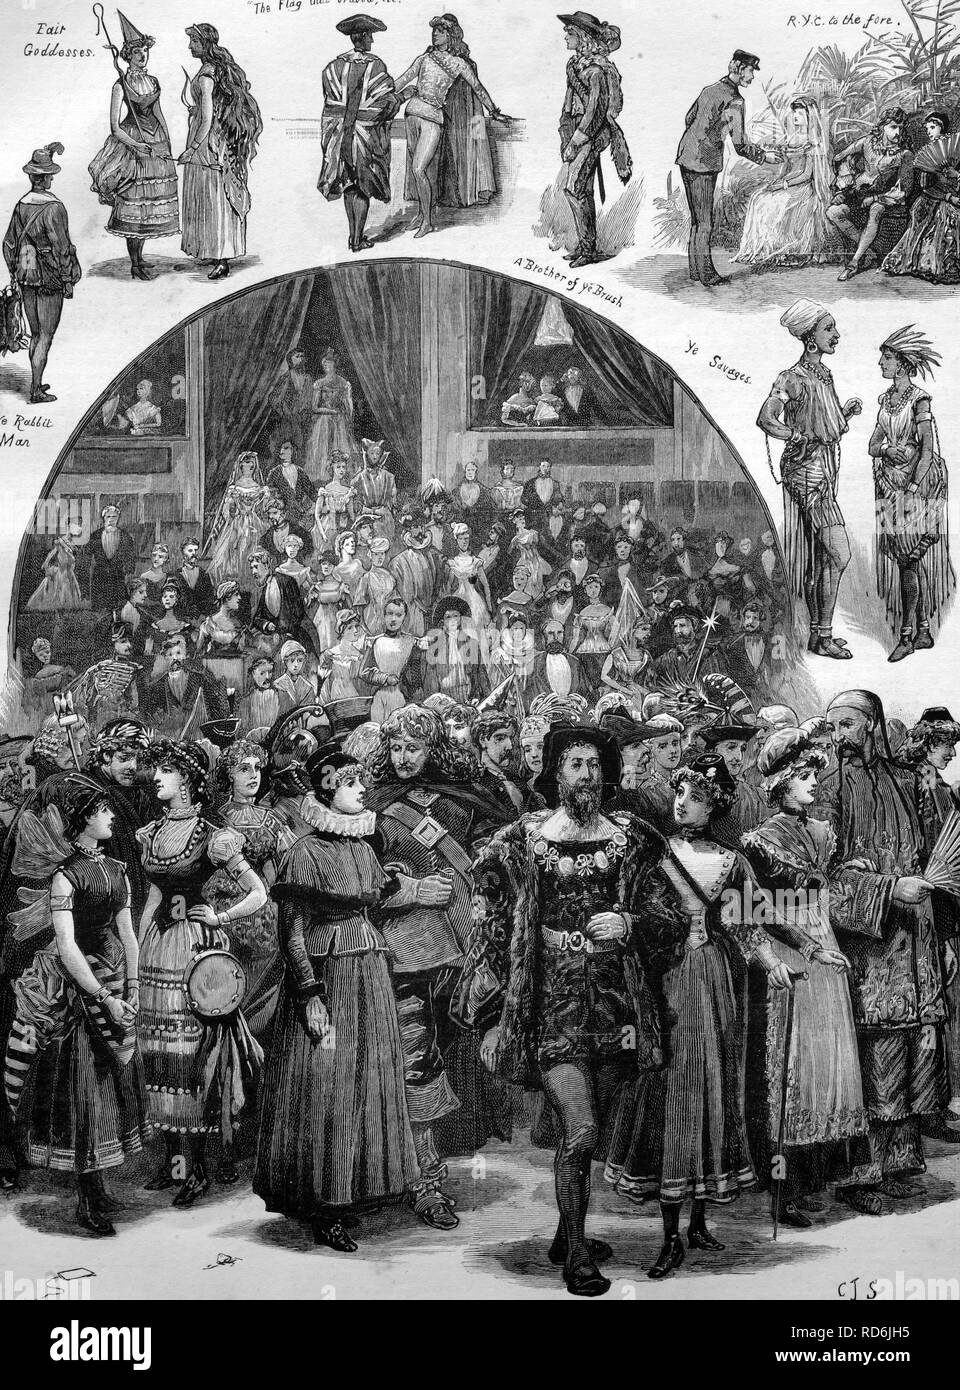 Fancy dress ball at the Royal Albert Hall for the benefit of Bolingbroke House, London, England, historical illustration, 1884 Stock Photo